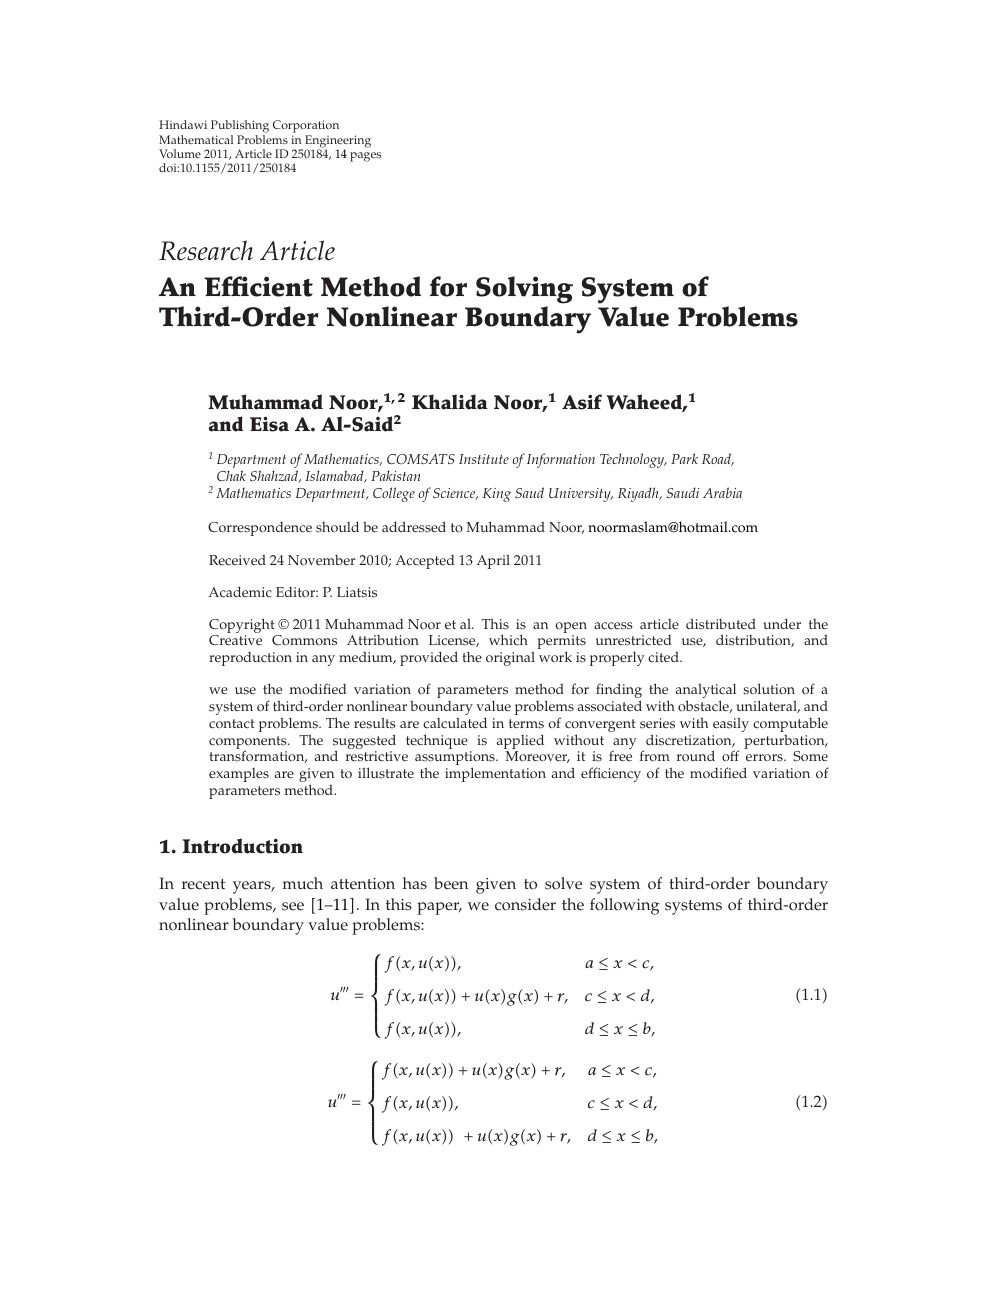 An Efficient Method For Solving System Of Third Order Nonlinear Boundary Value Problems Topic Of Research Paper In Mathematics Download Scholarly Article Pdf And Read For Free On Cyberleninka Open Science Hub